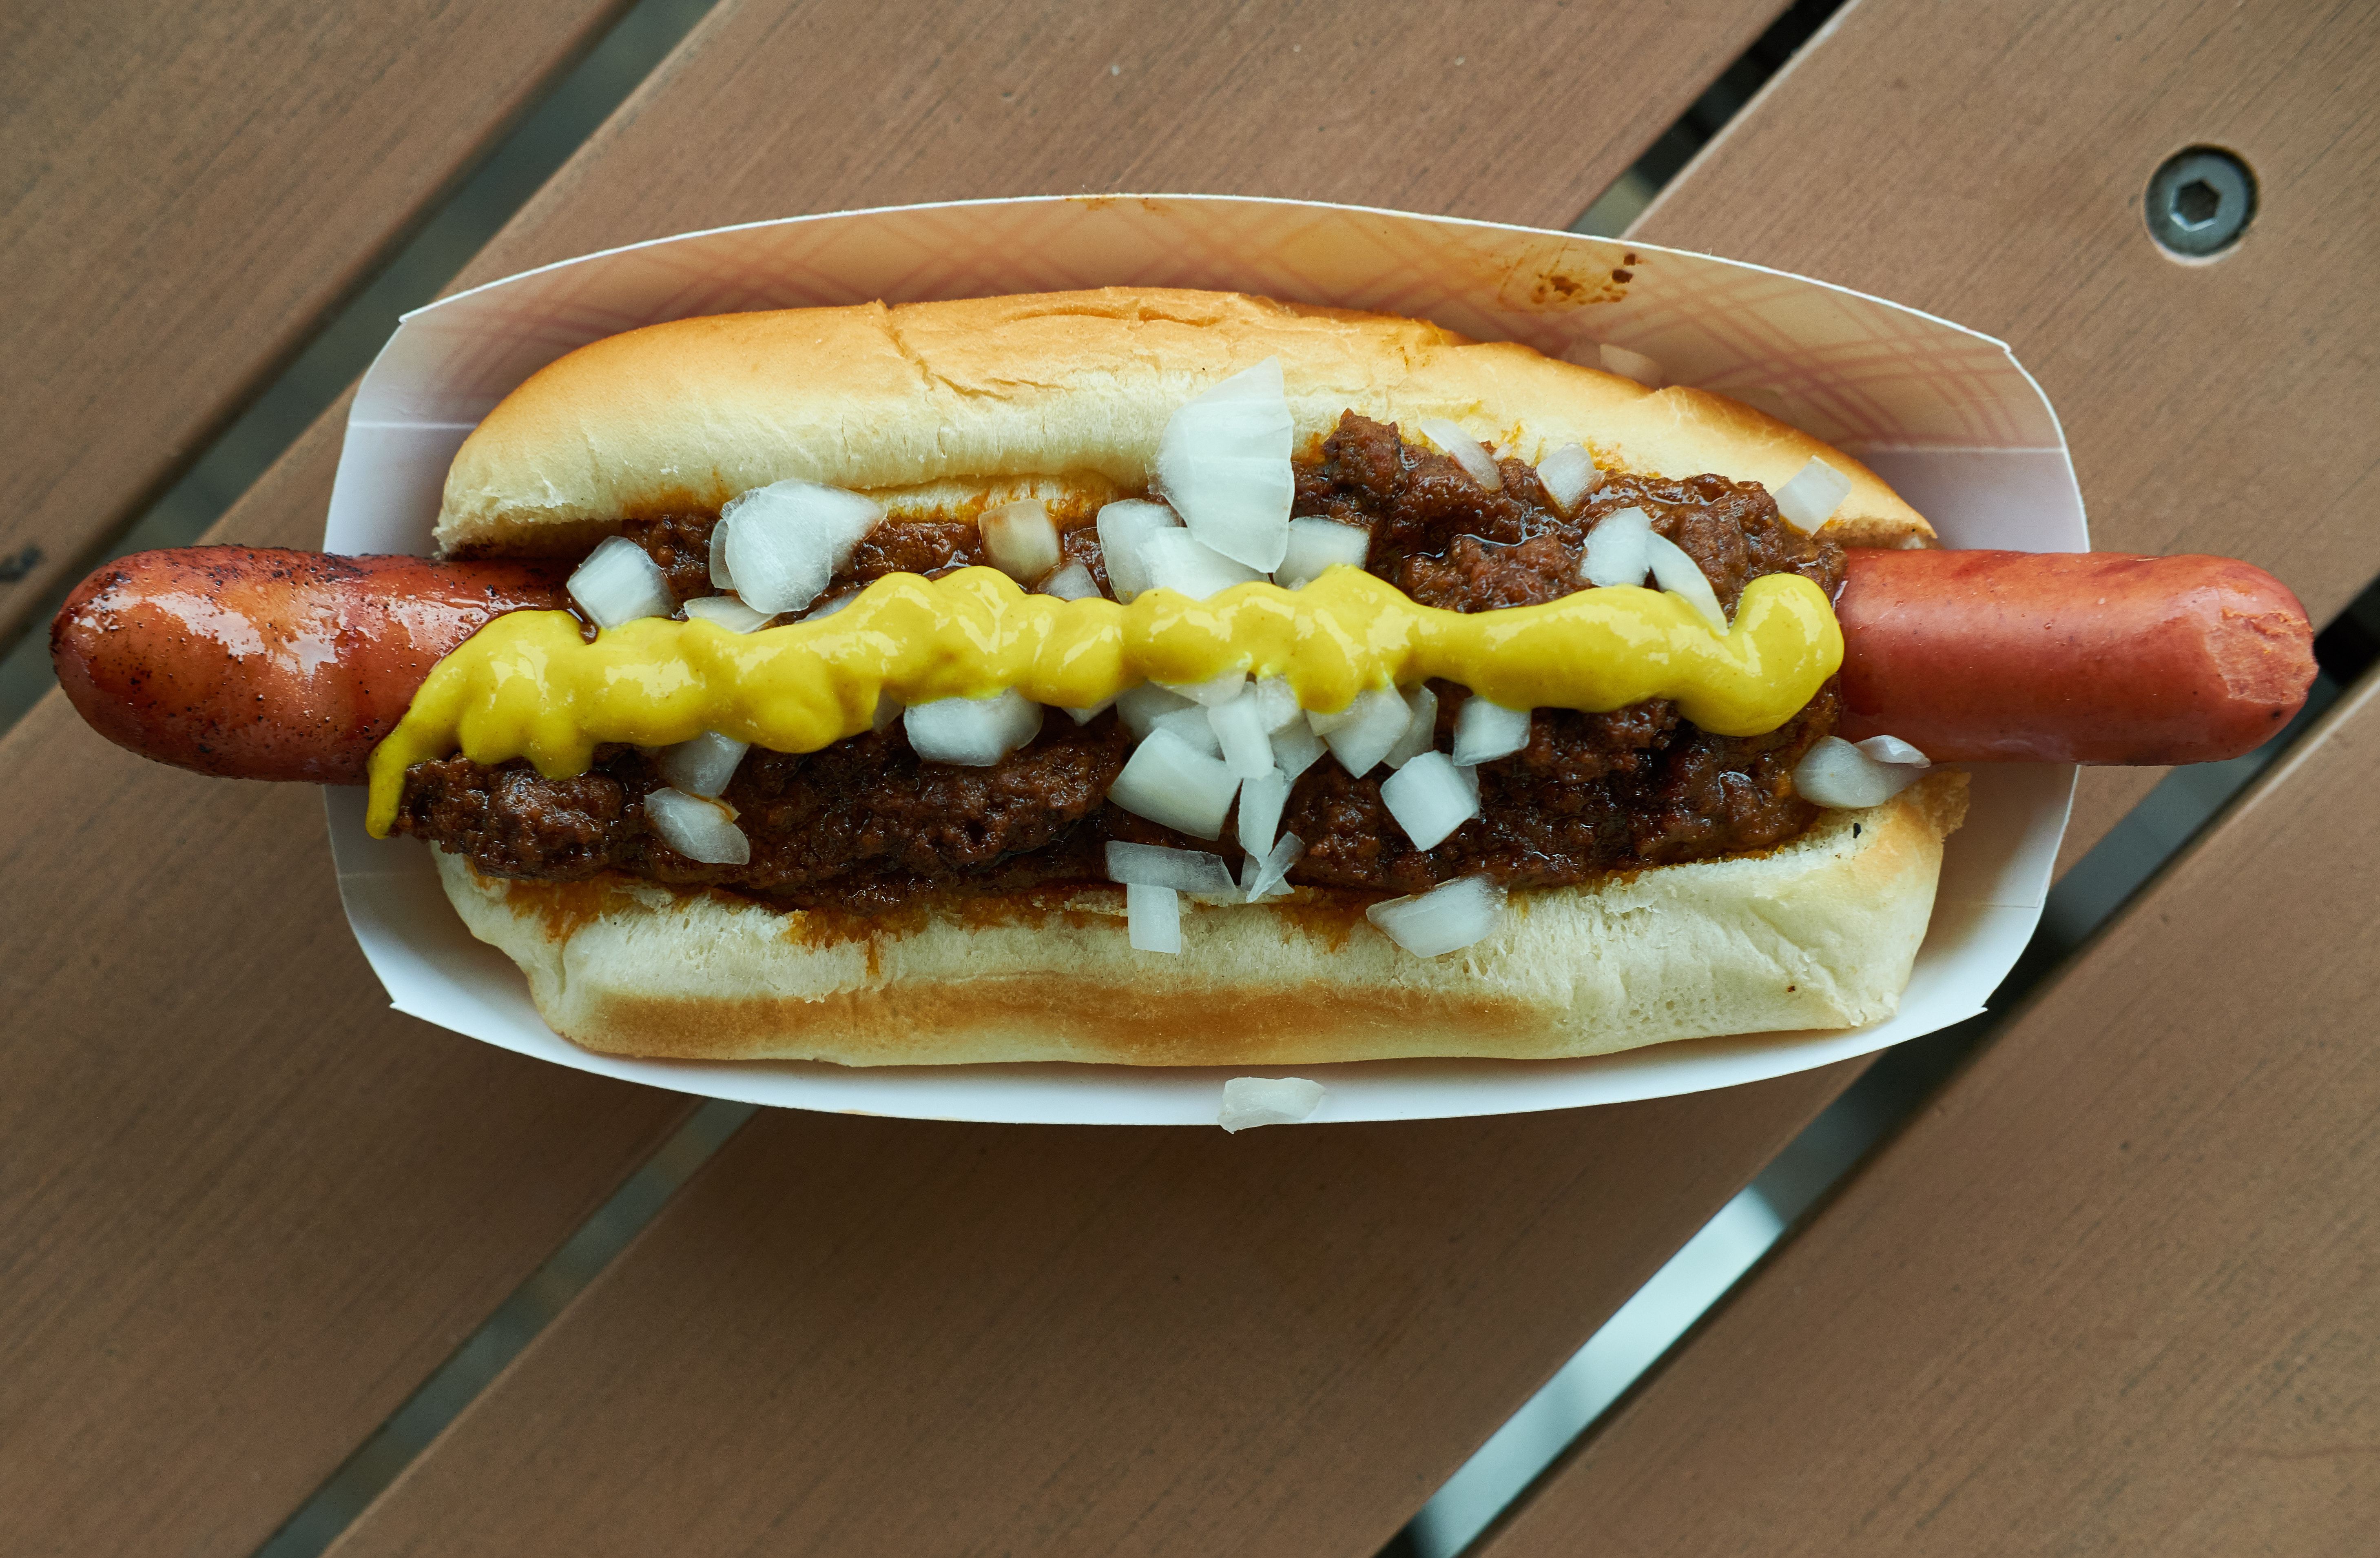 A frankfurter in a bun, covered in Coney sauce, chopped white onion, and yellow mustard.